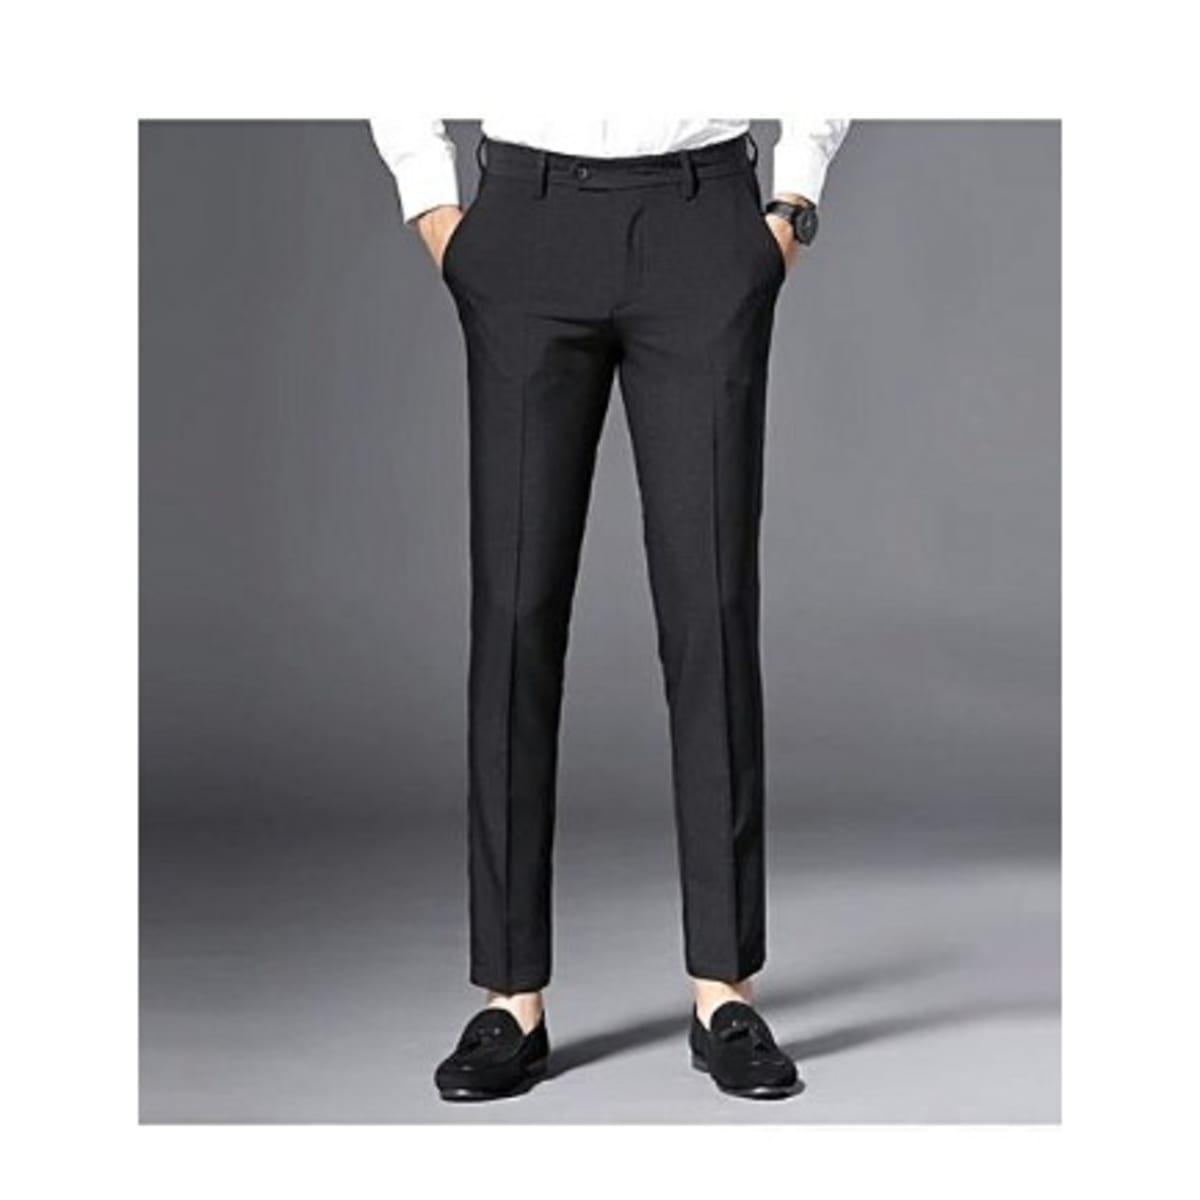 Black Formal Trousers For Men Daily Office Wear Formal Pant For Man   Dilutee India